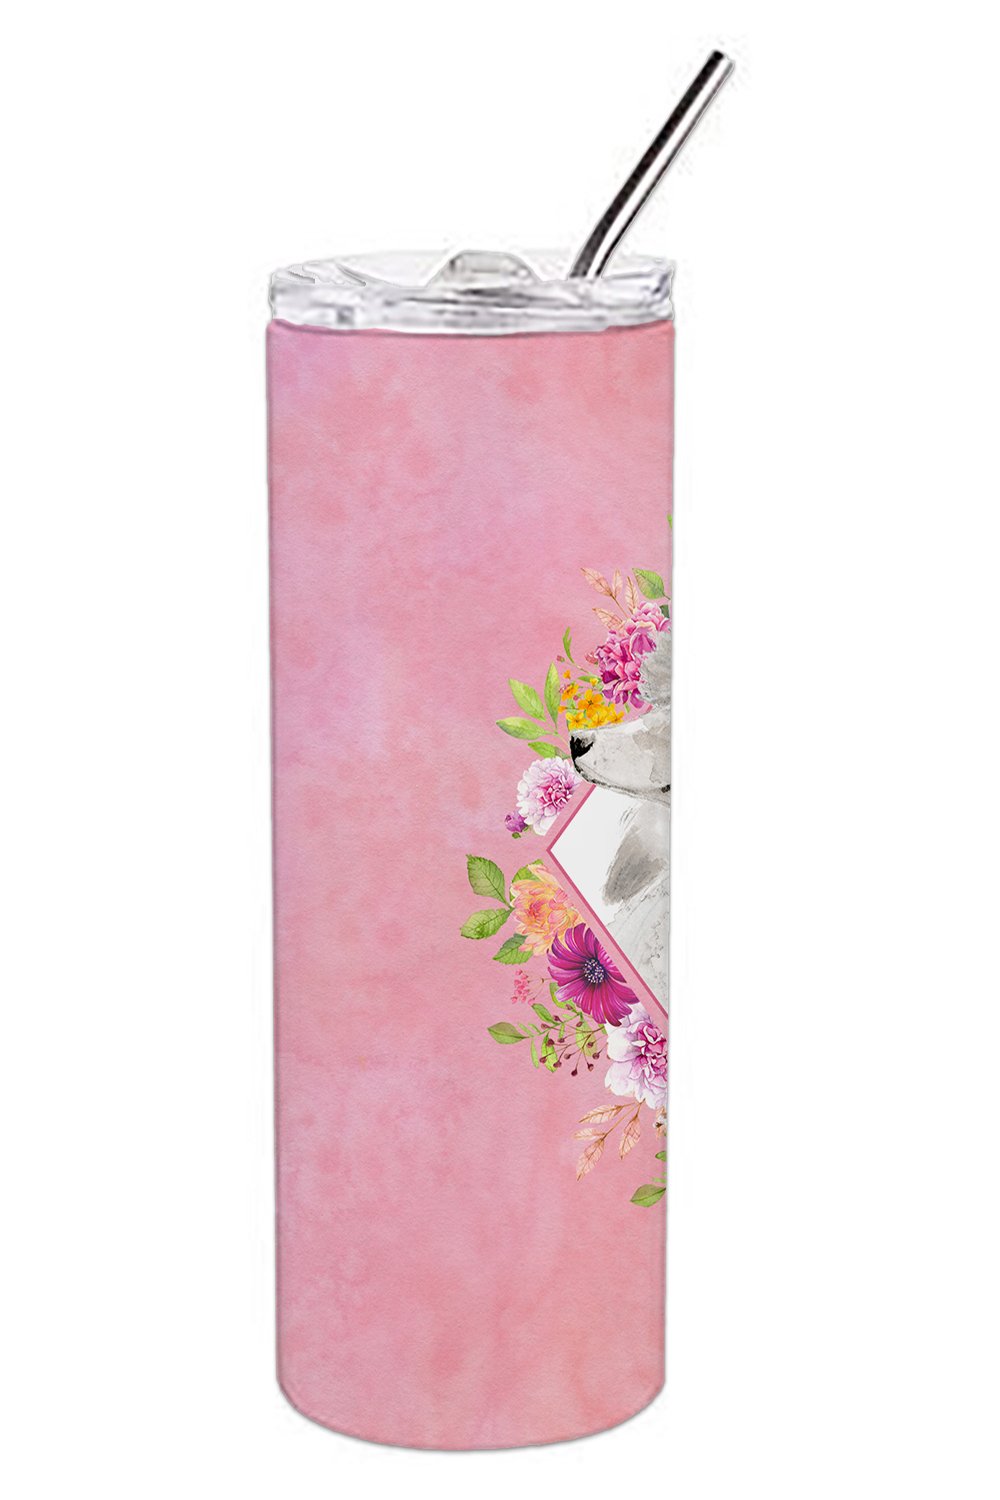 White Standard Poodle Pink Flowers Double Walled Stainless Steel 20 oz Skinny Tumbler CK4200TBL20 by Caroline's Treasures